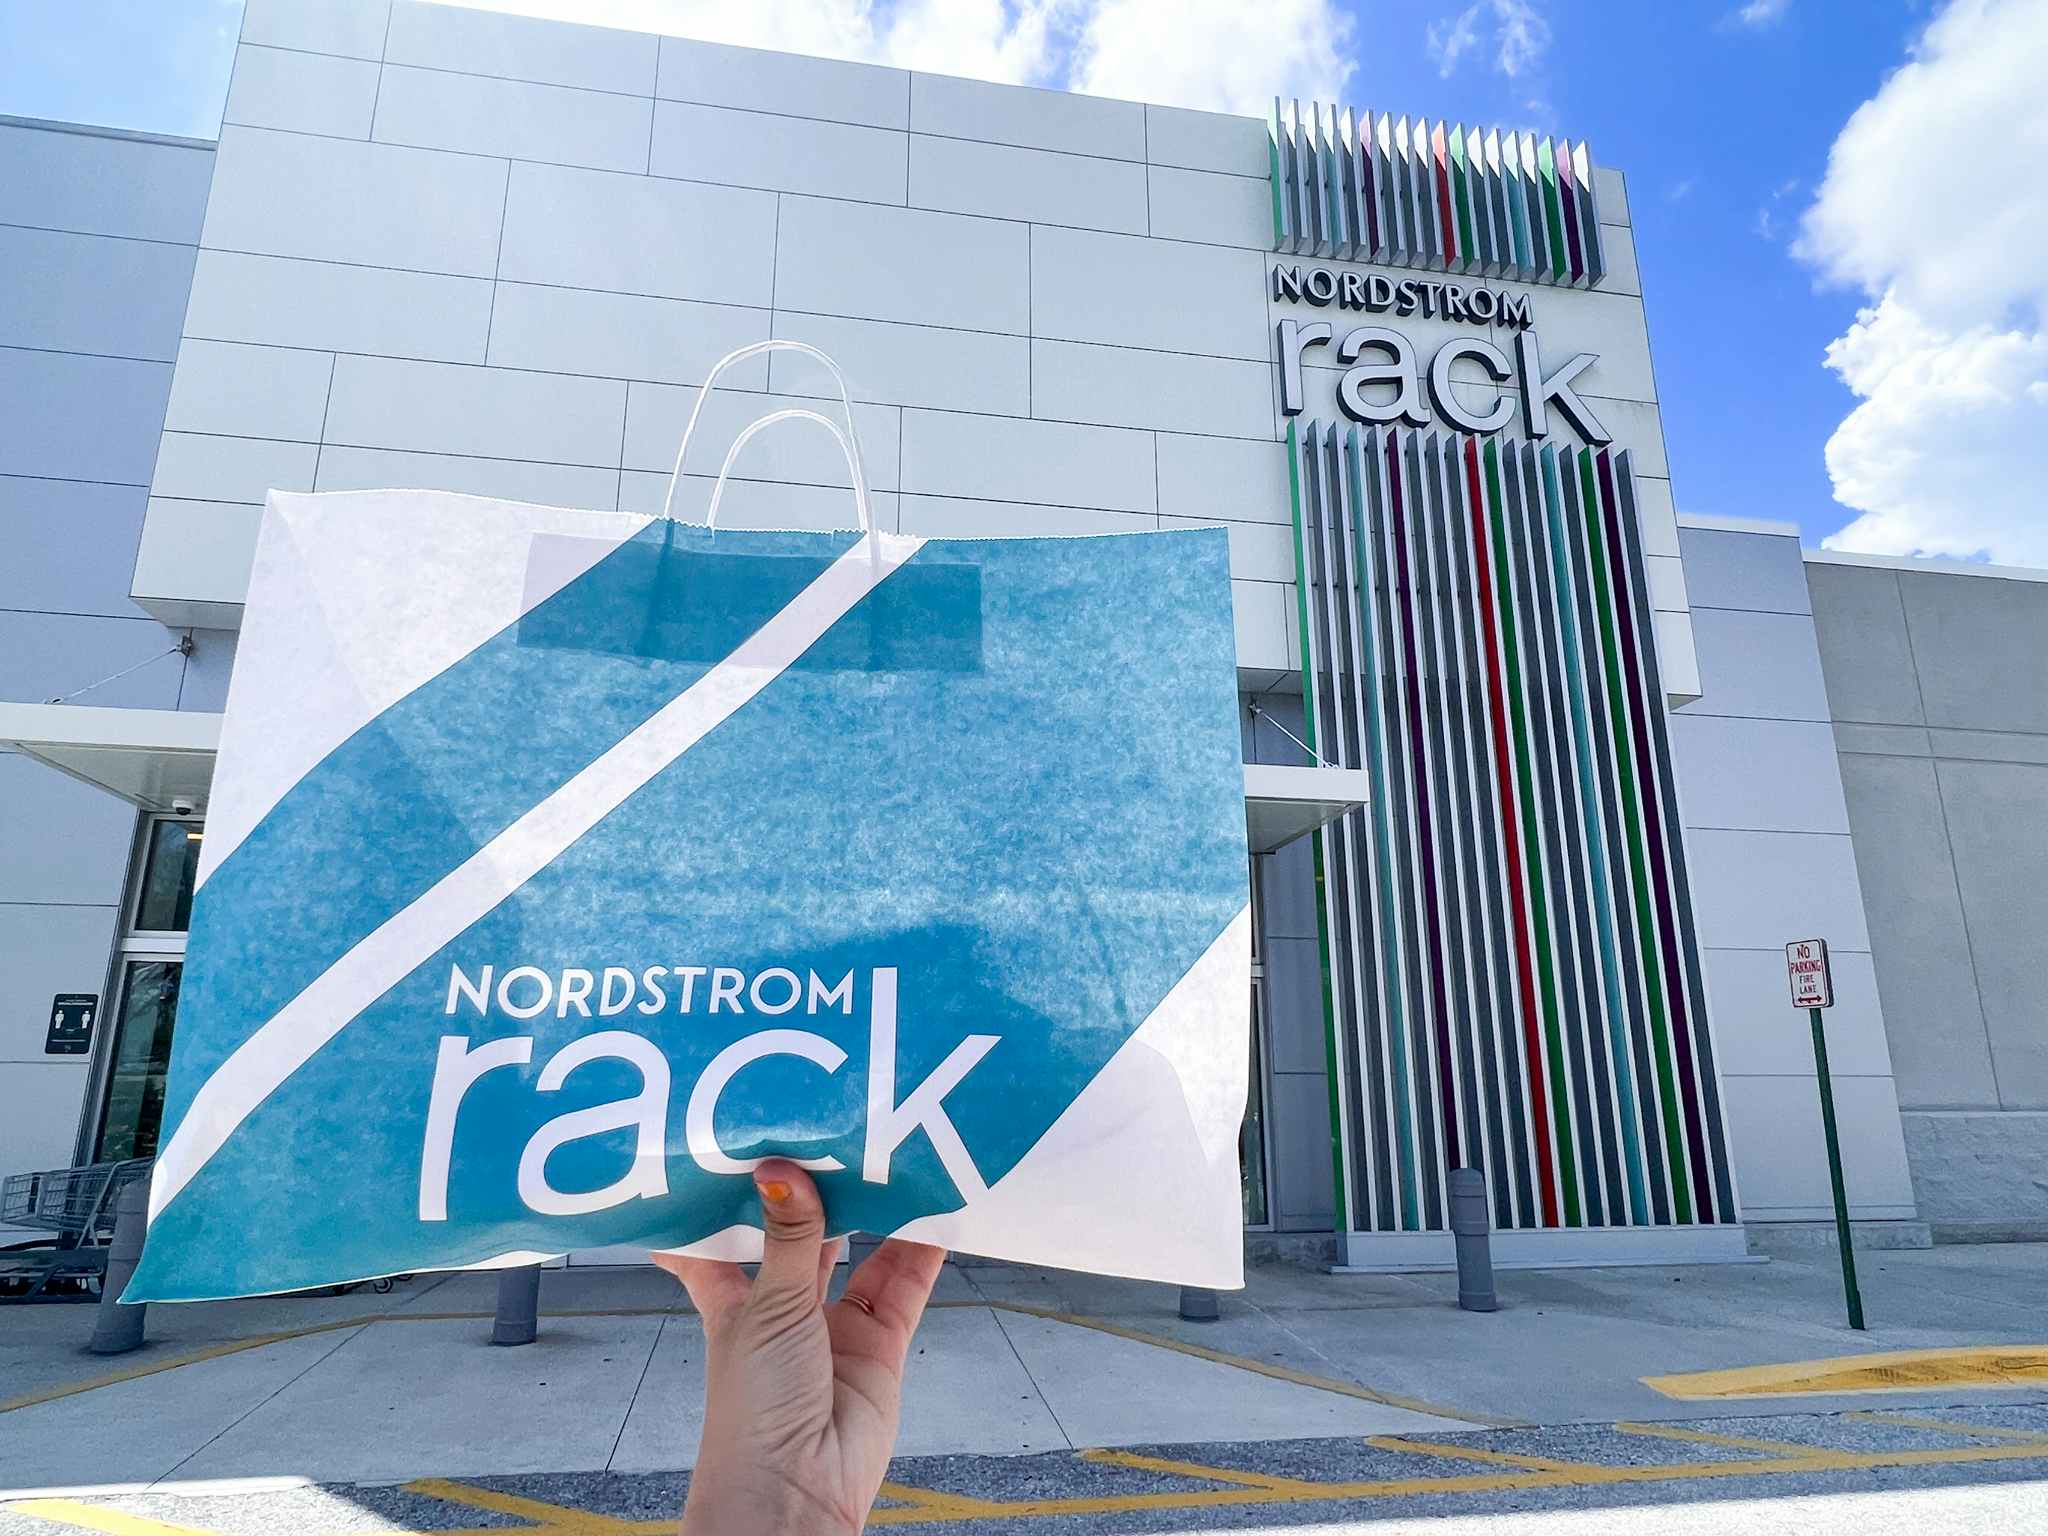 Up to 90% Off Nordstrom Rack Clearance, Clothing from $6.65